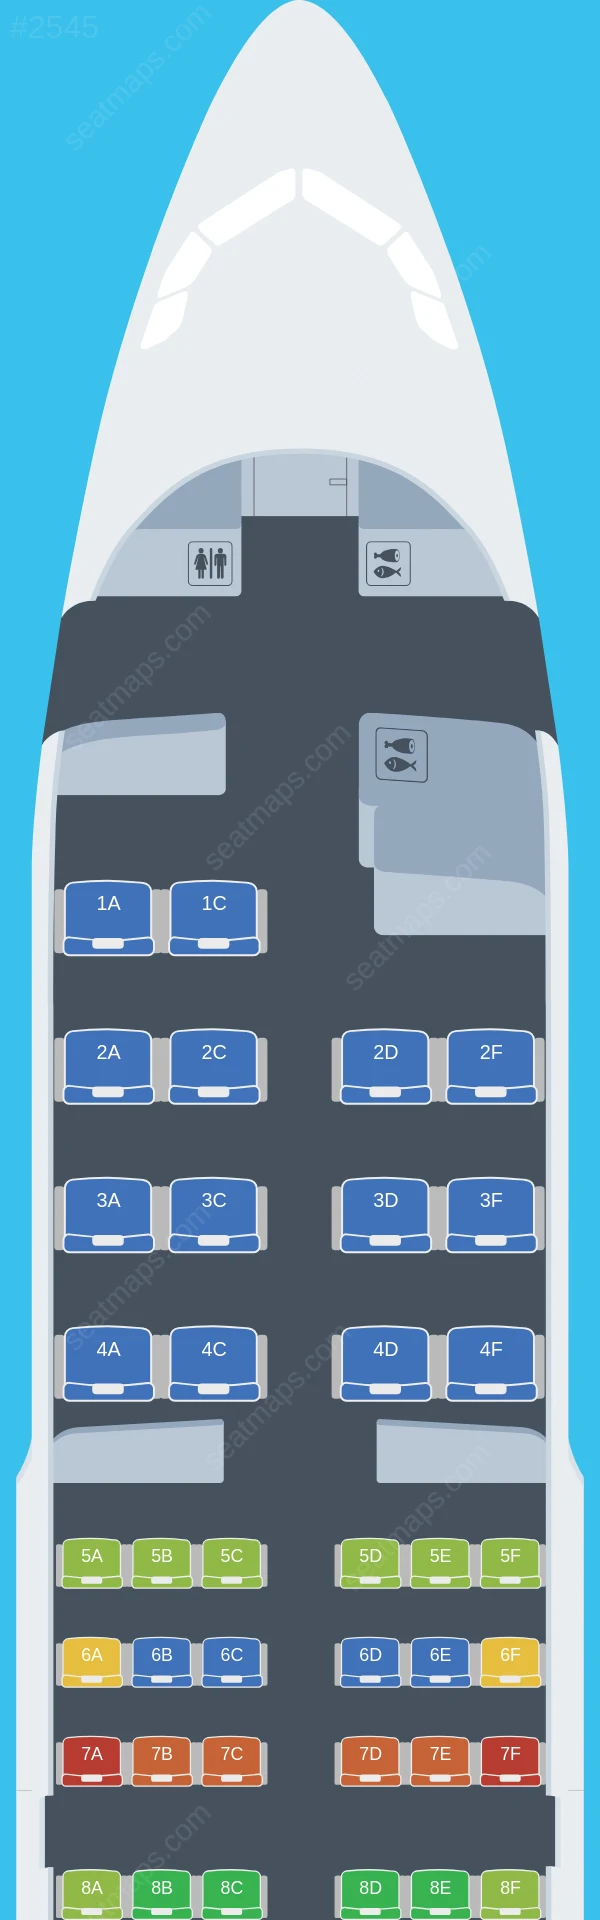 Iberia Airbus A319-100 V.2 seatmap preview